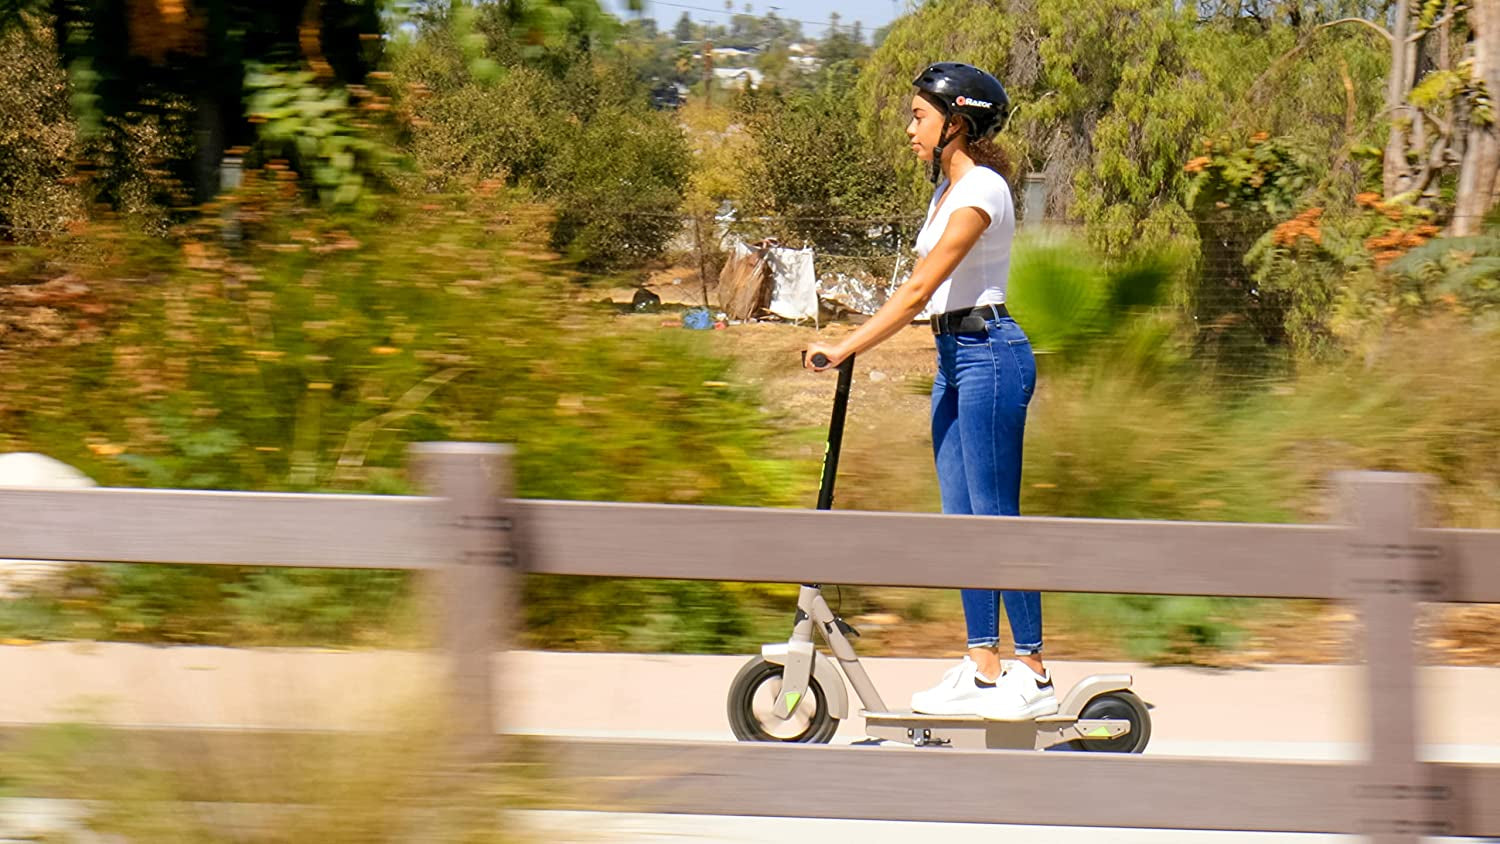 C25 Electric Scooter – Air-Filled Tires, Rear-Wheel Drive, Foldable & Portable, Sturdy Electric Scooter for Commute & Recreation